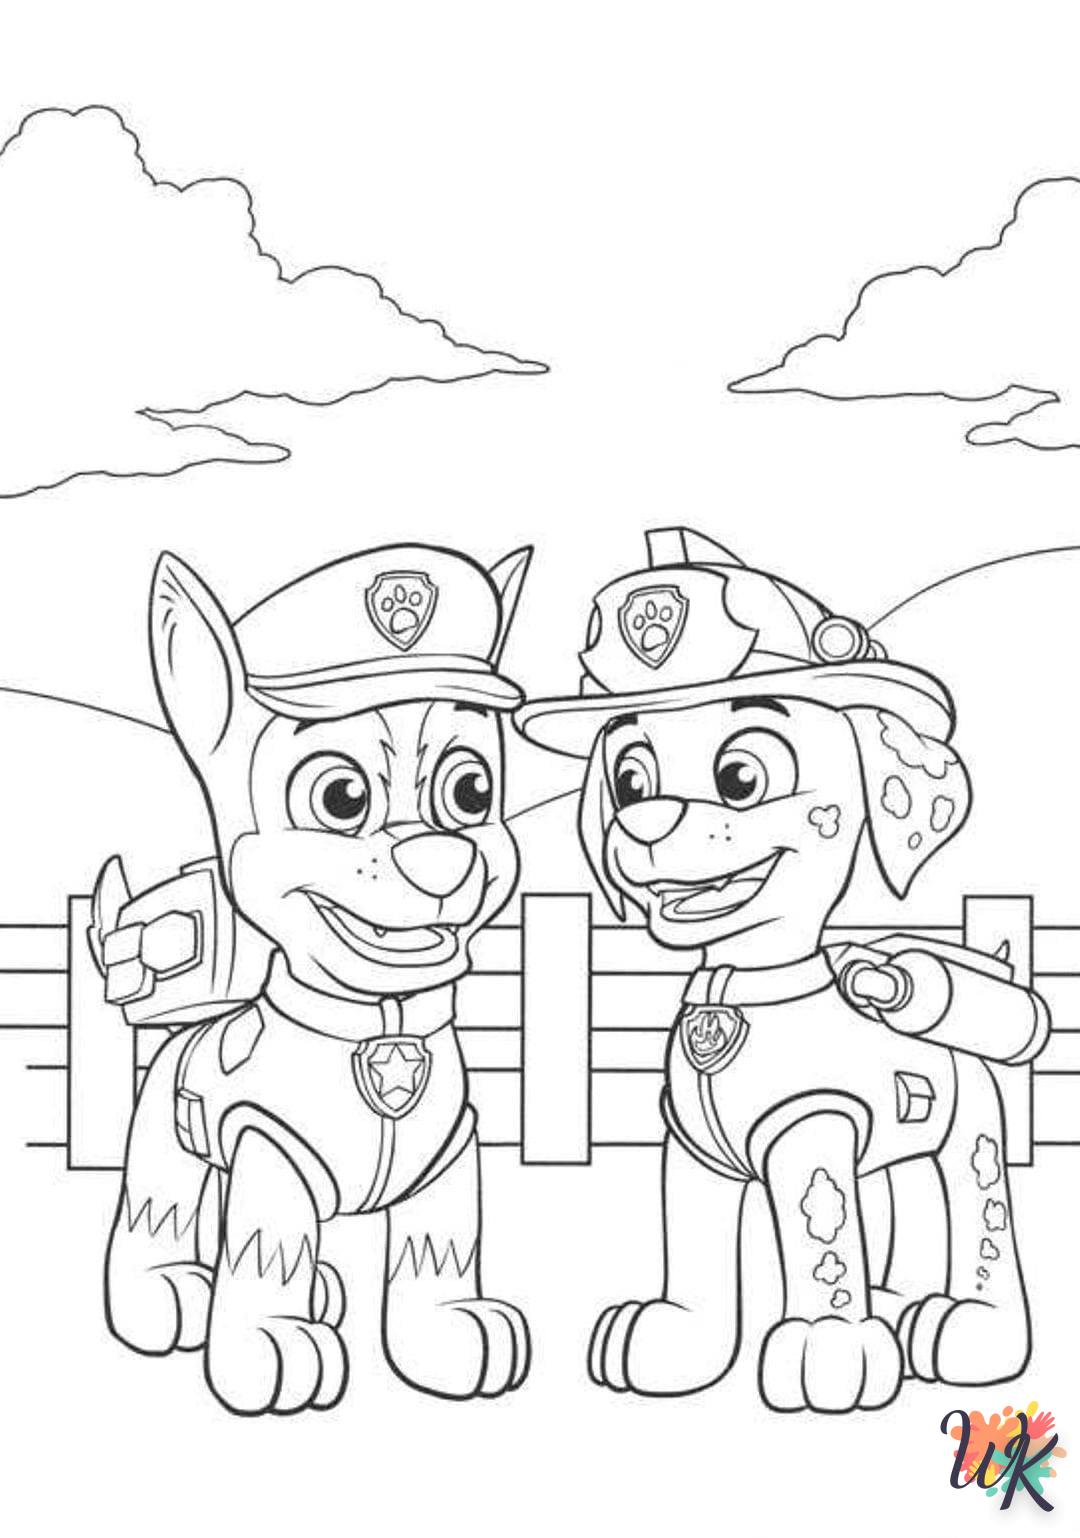 Paw Patrol coloring page to print for 7 year olds